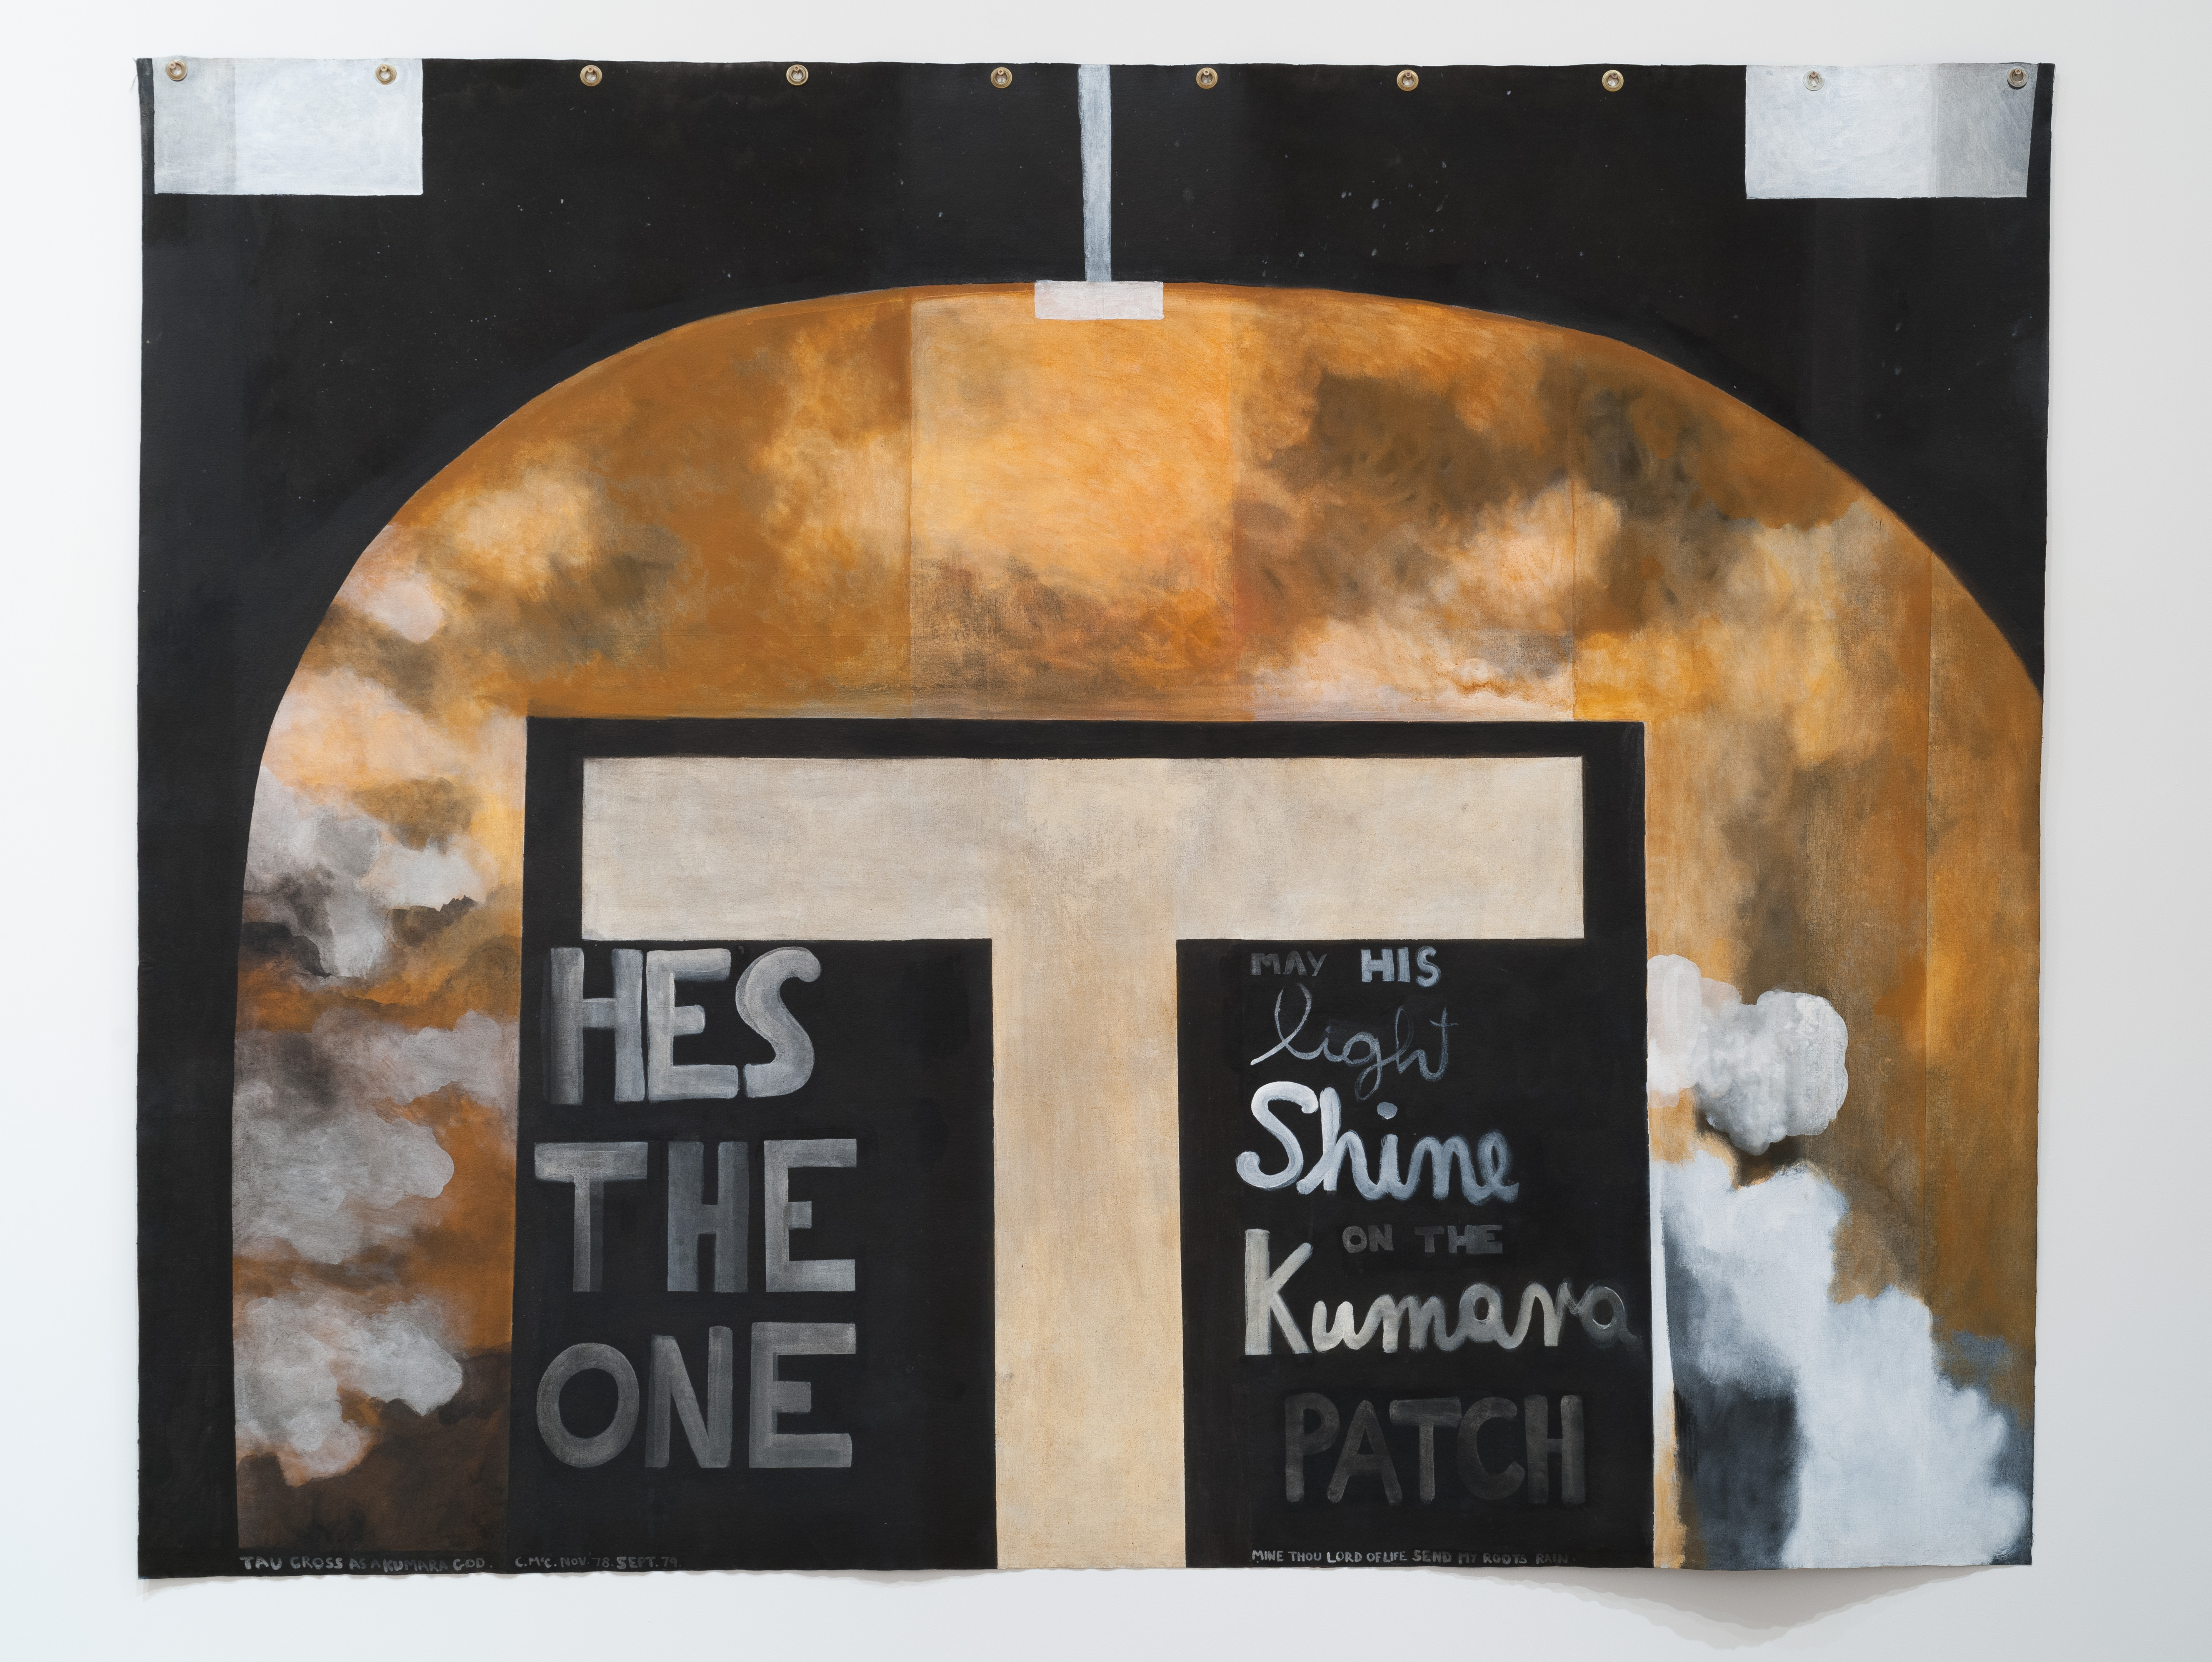 <p><strong>Colin McCahon </strong><em>May His light shine (Tau Cross) </em>1978-1979, Chartwell Collection, Auckland Art Gallery Toi o Tāmaki, 1980. Courtesy of the Colin McCahon Research and Publication Trust.</p>

<p>&nbsp;</p>